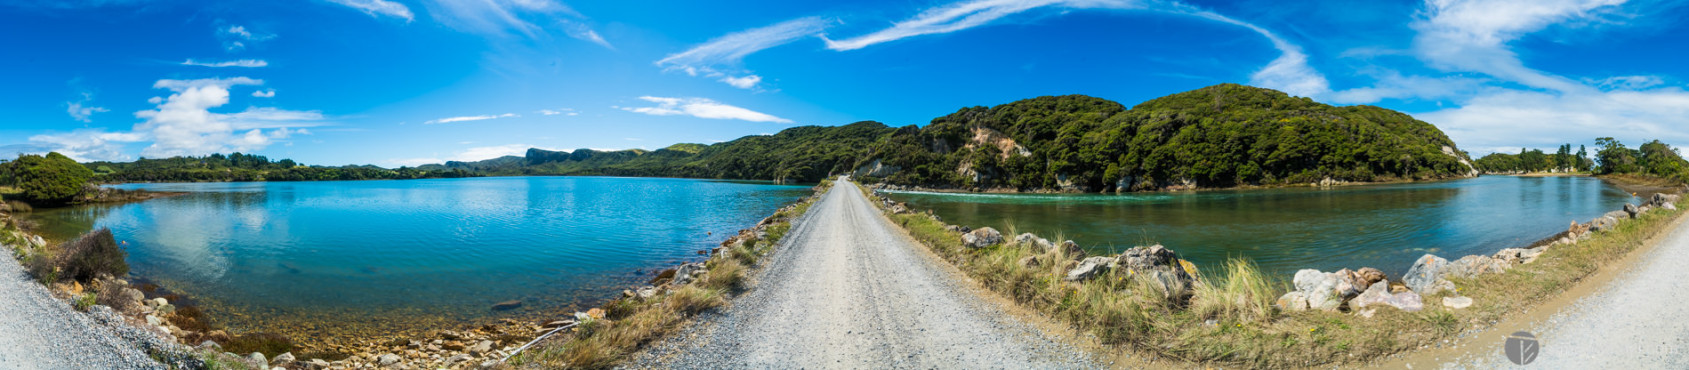 On the road to Farewell Spit, Golden Bay, New Zealand